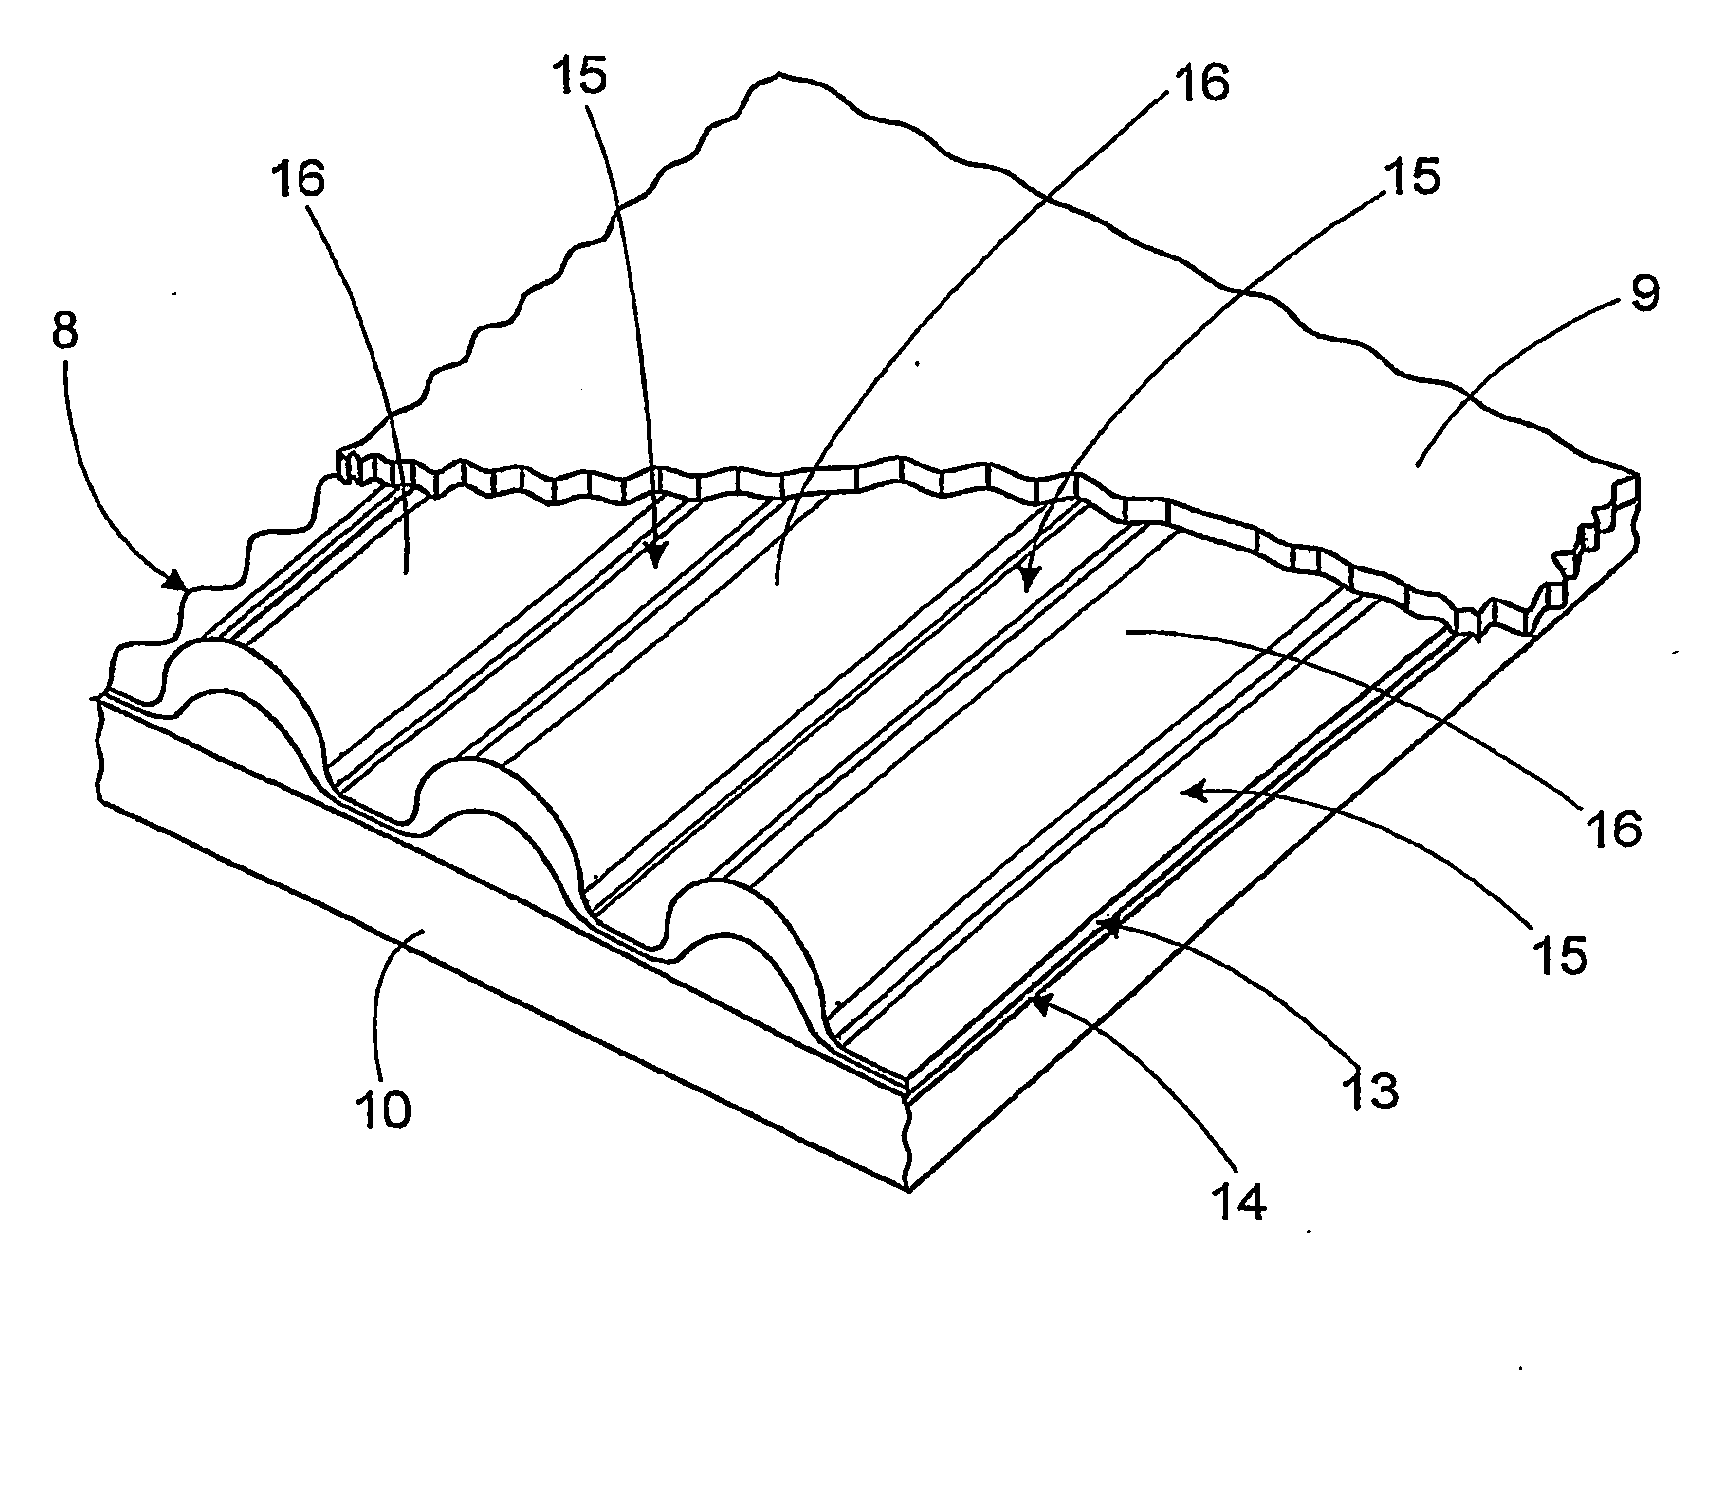 Transfer layer of liquid fluids and an absorbent article incorporating the same